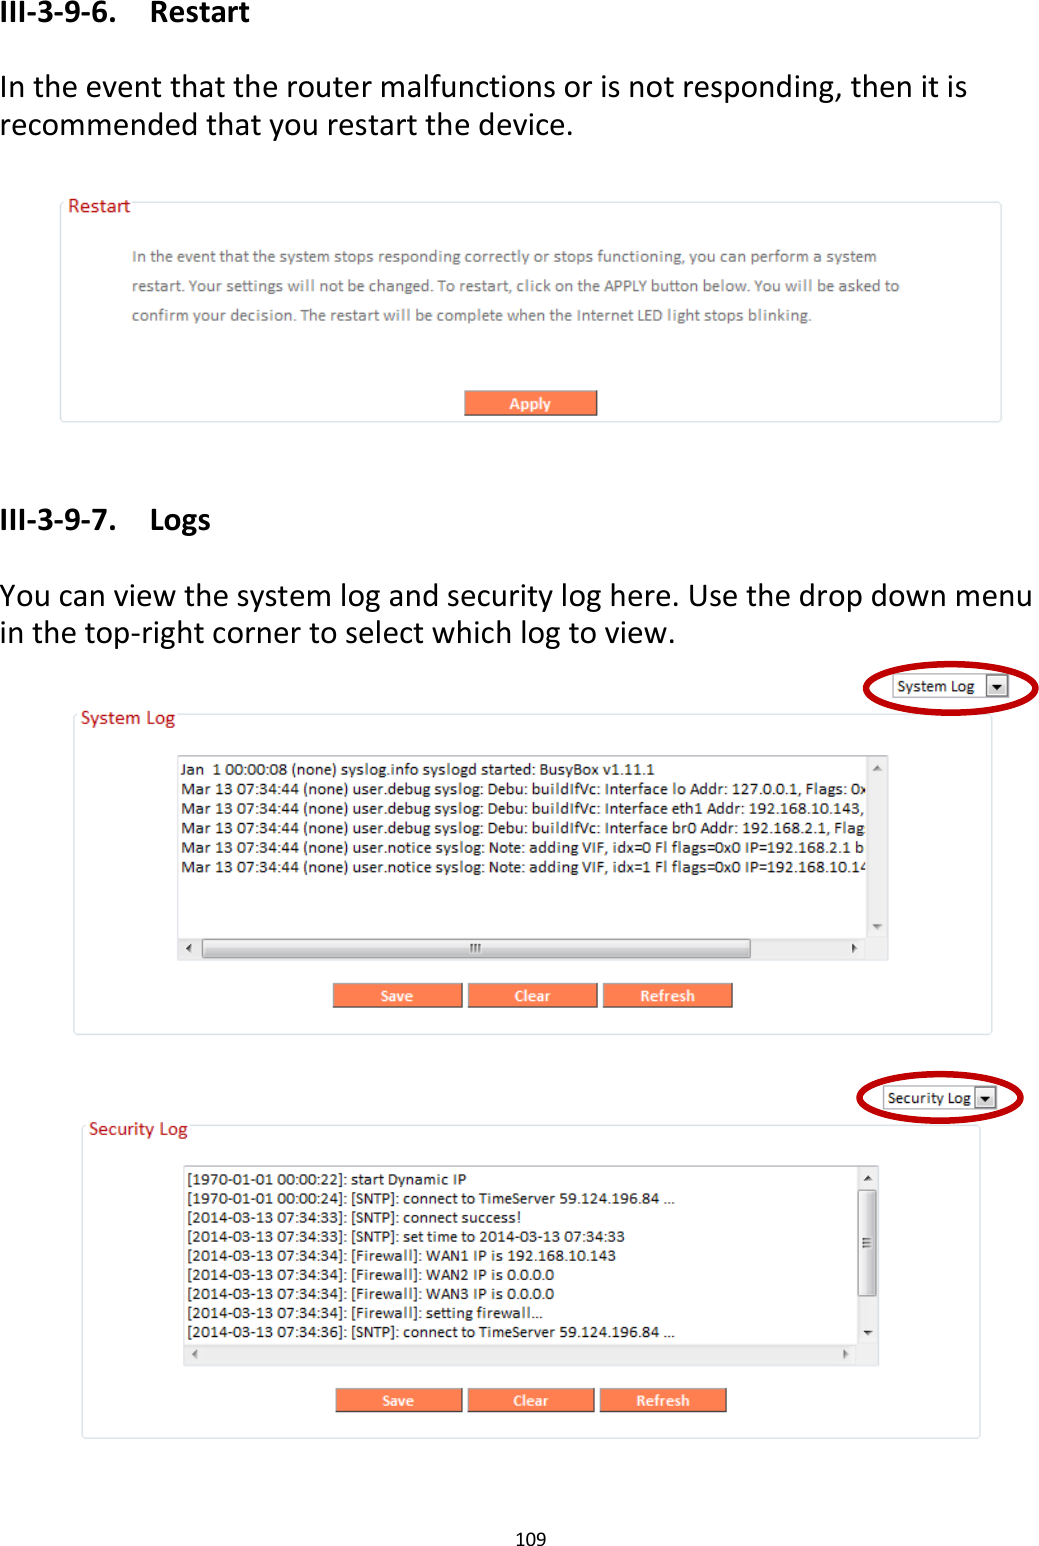 109  III-3-9-6.  Restart  In the event that the router malfunctions or is not responding, then it is recommended that you restart the device.    III-3-9-7.  Logs  You can view the system log and security log here. Use the drop down menu in the top-right corner to select which log to view.       